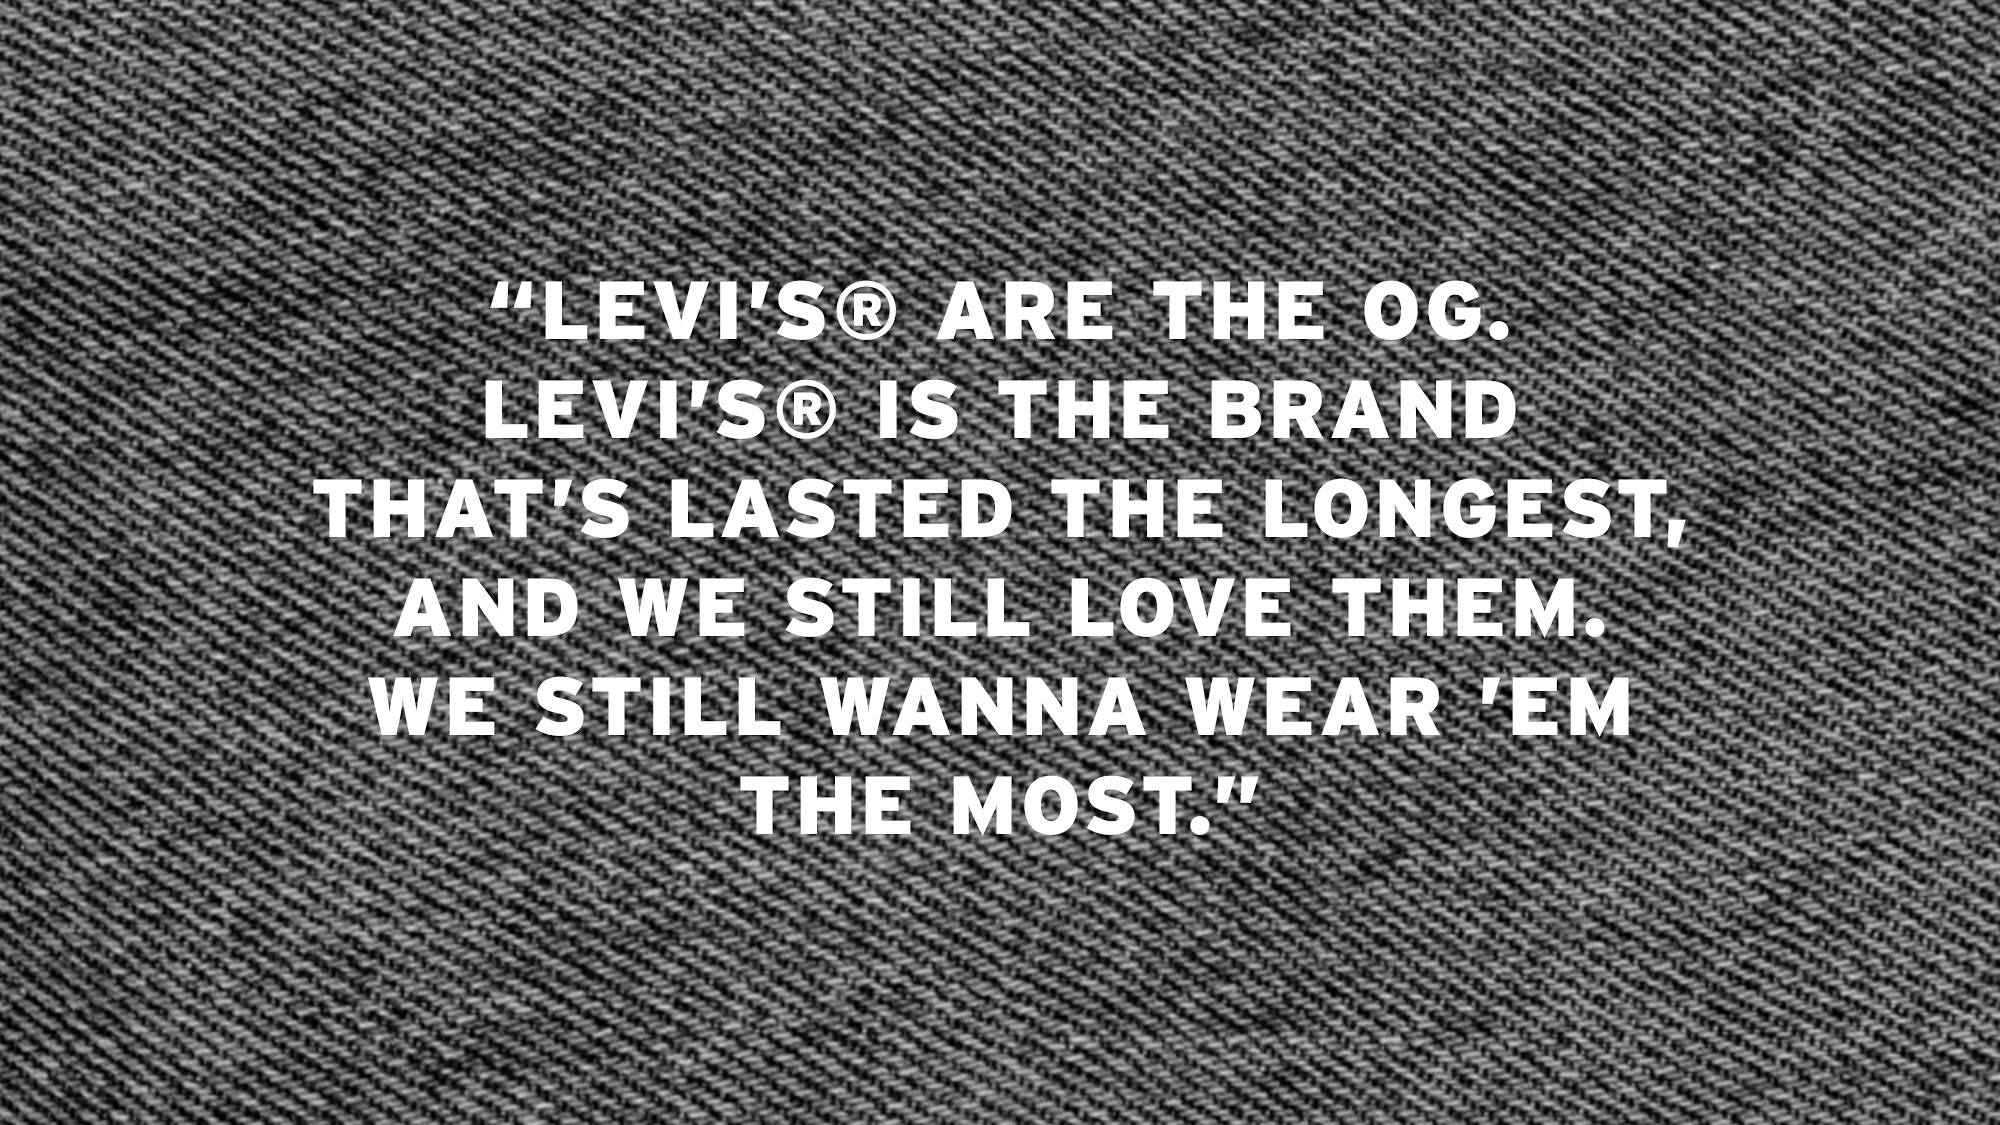 Quoted graphic text to read: "Levi’s® are the OG. Levi’s® is the brand that’s lasted the longest, and we still love them. We still wanna wear ’em the most."